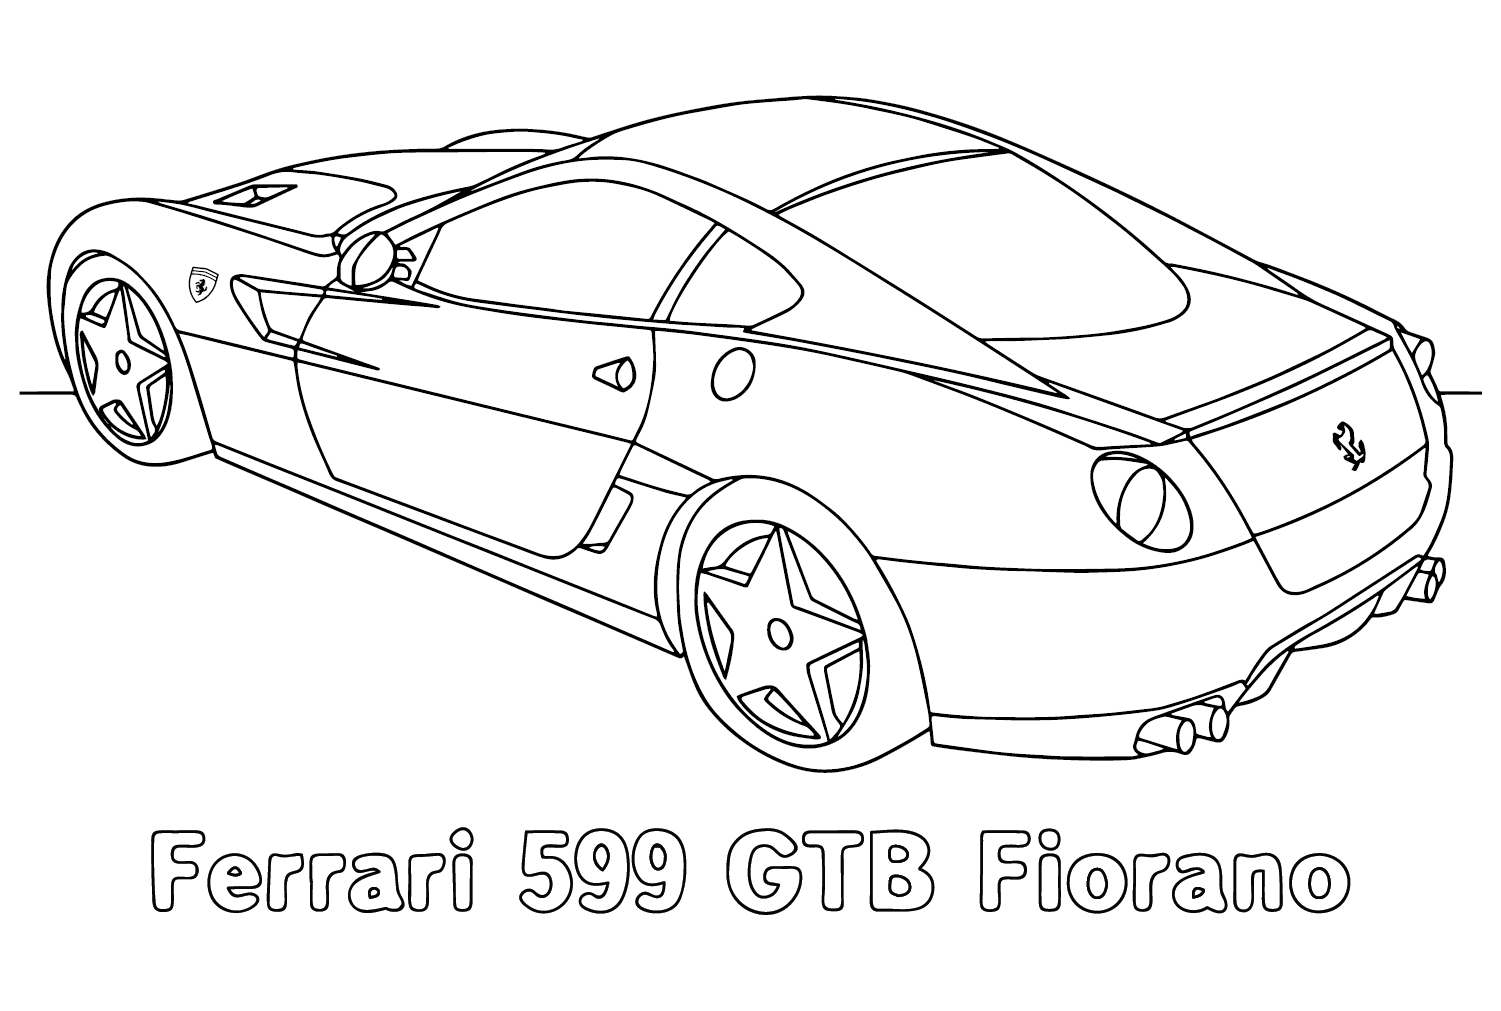 Ferrari 599 GTB Fiorano Coloring Page - Free Printable Coloring Pages